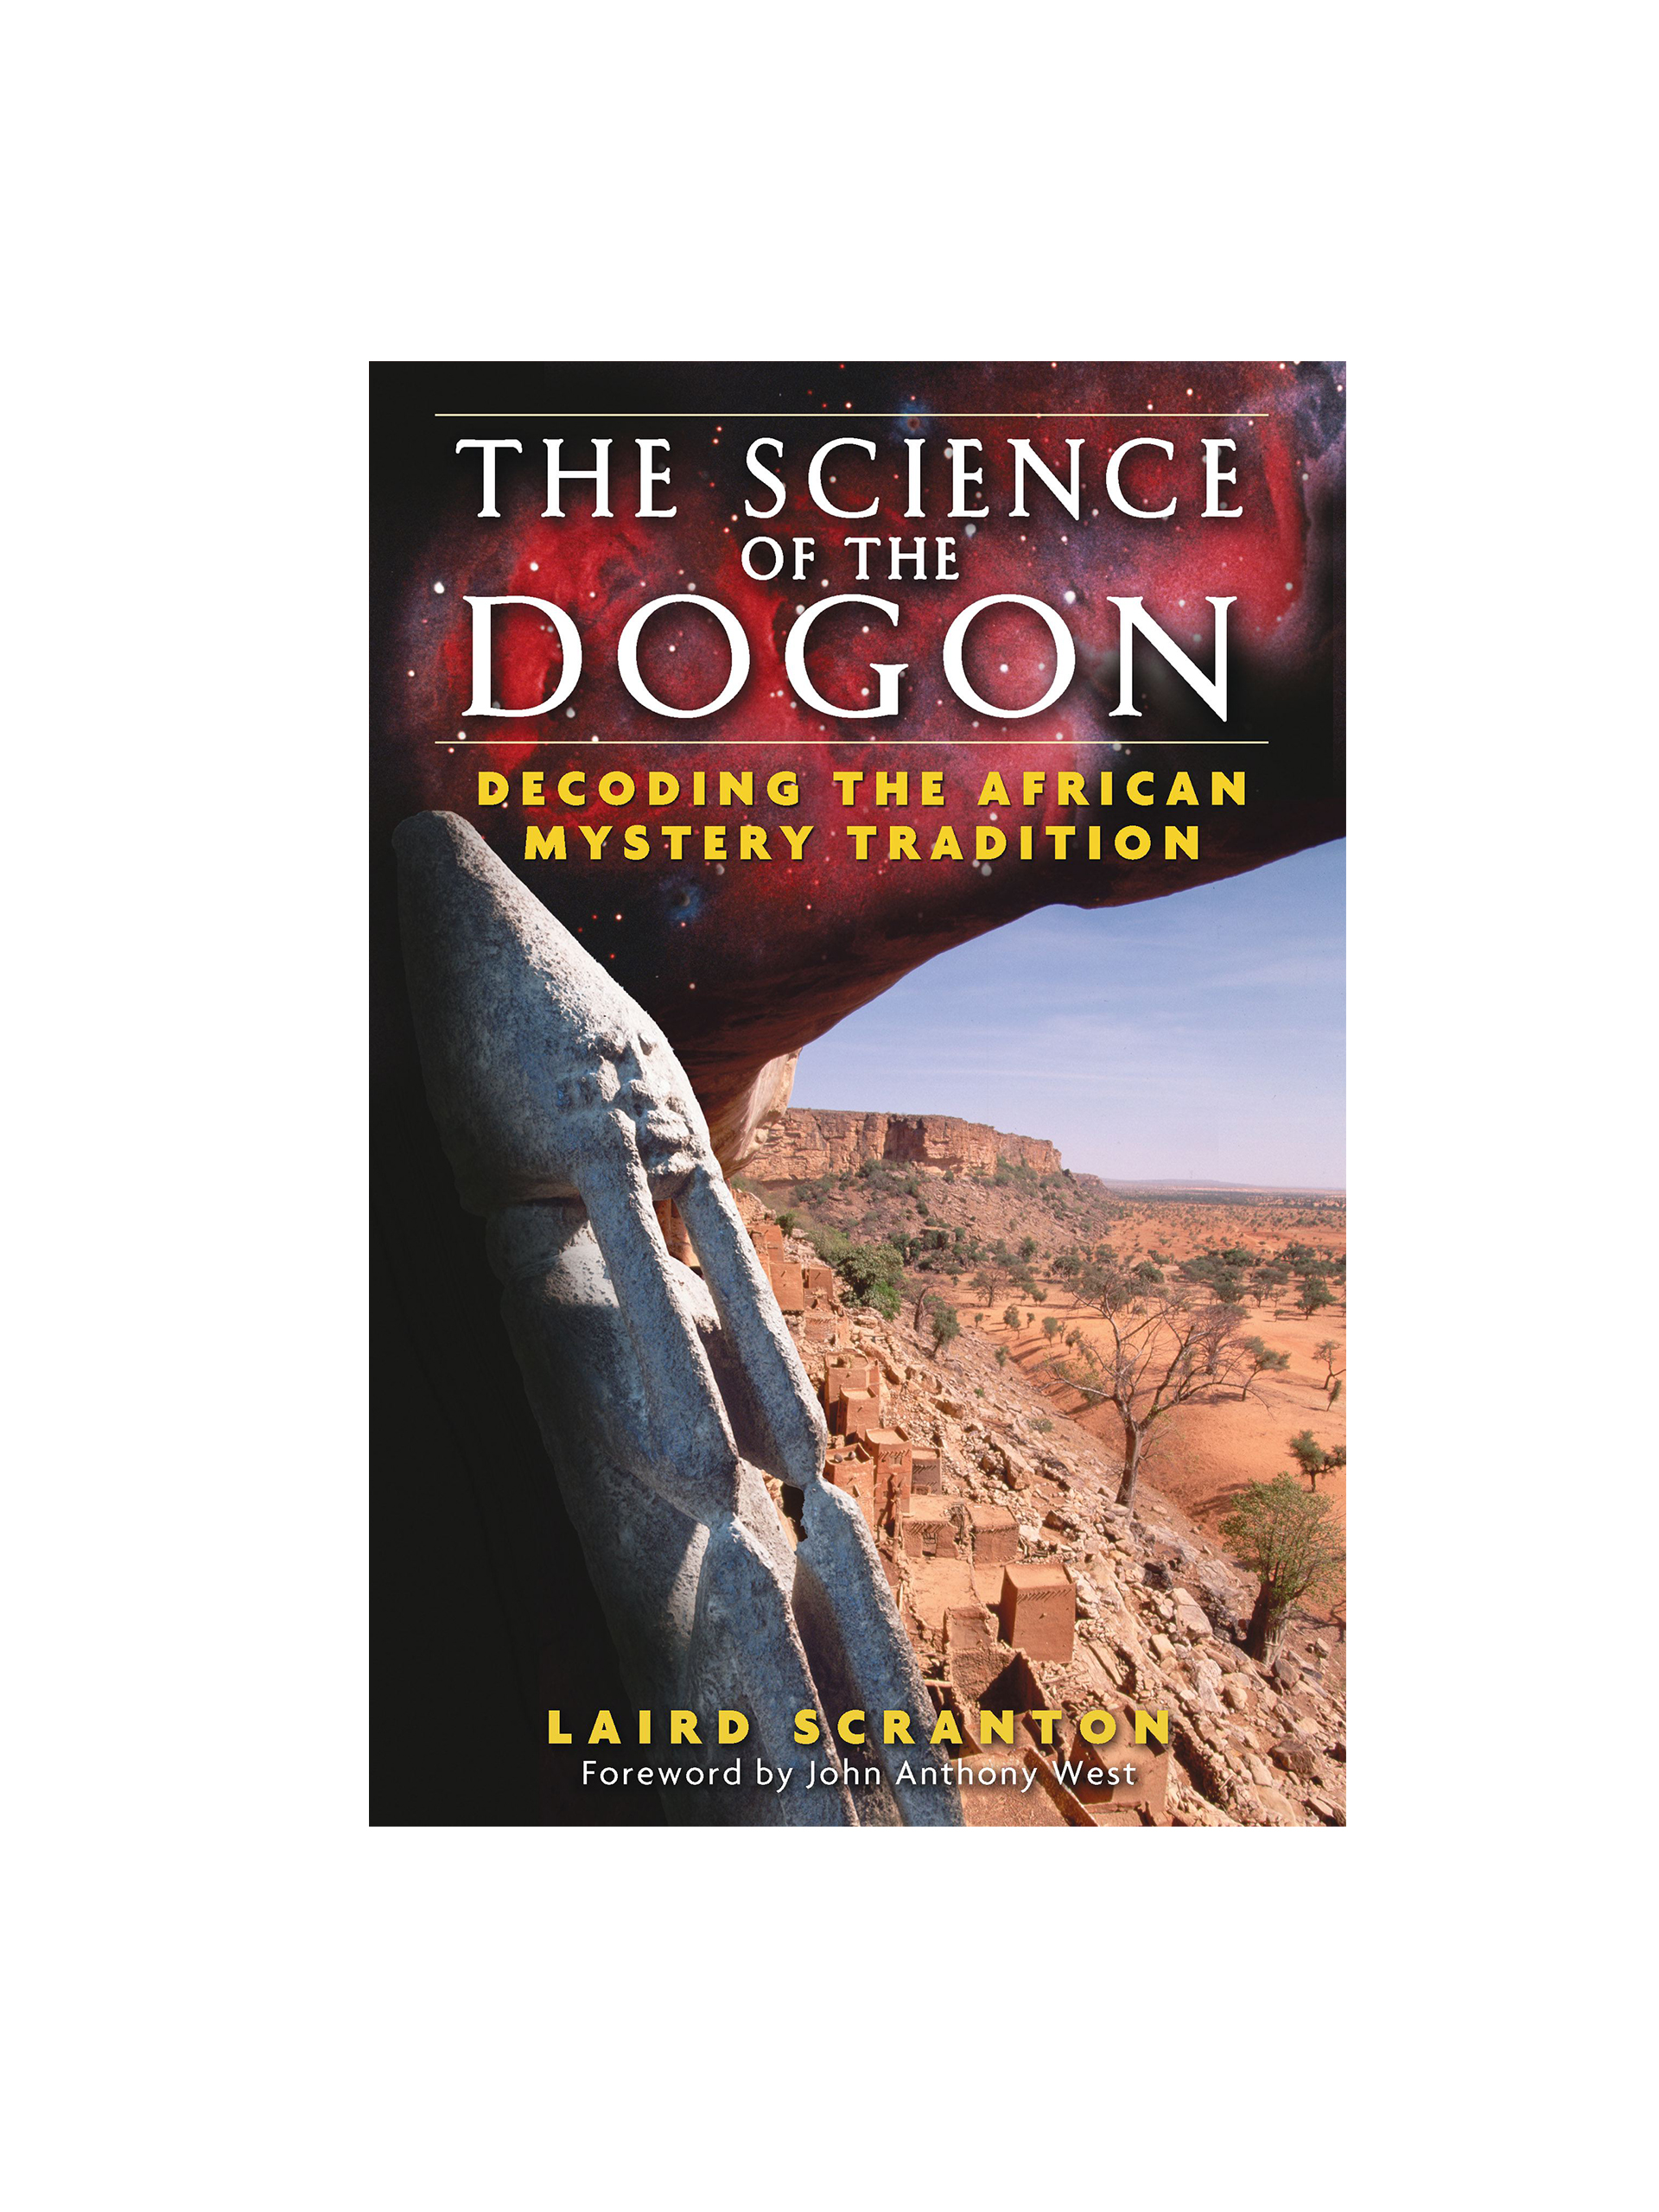 Image of book the science of the dogon